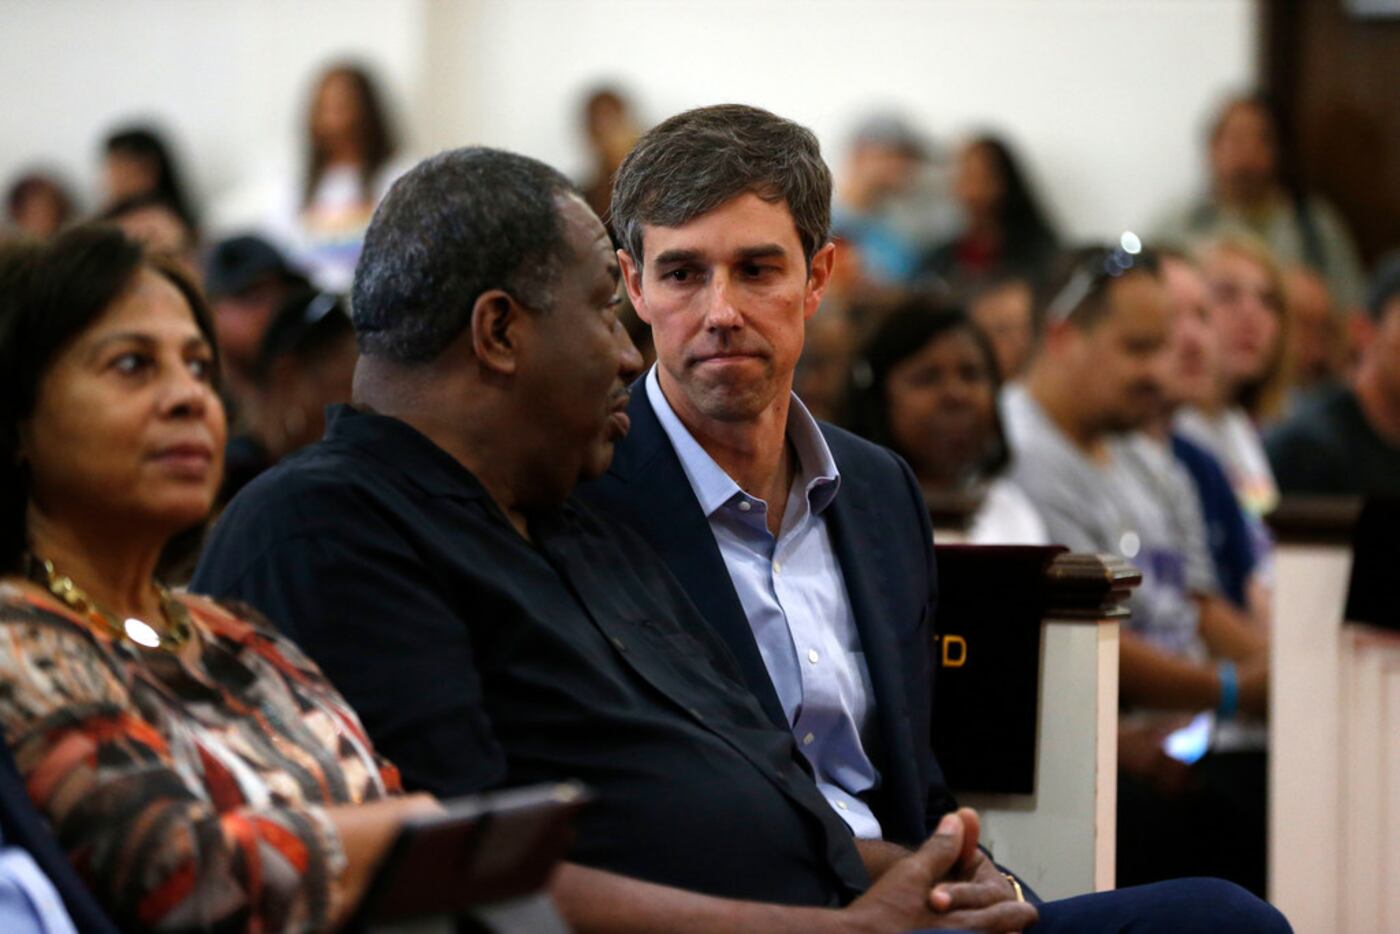 Beto O'Rourke talked to state Sen. Royce West (left) before speaking to the crowd during...